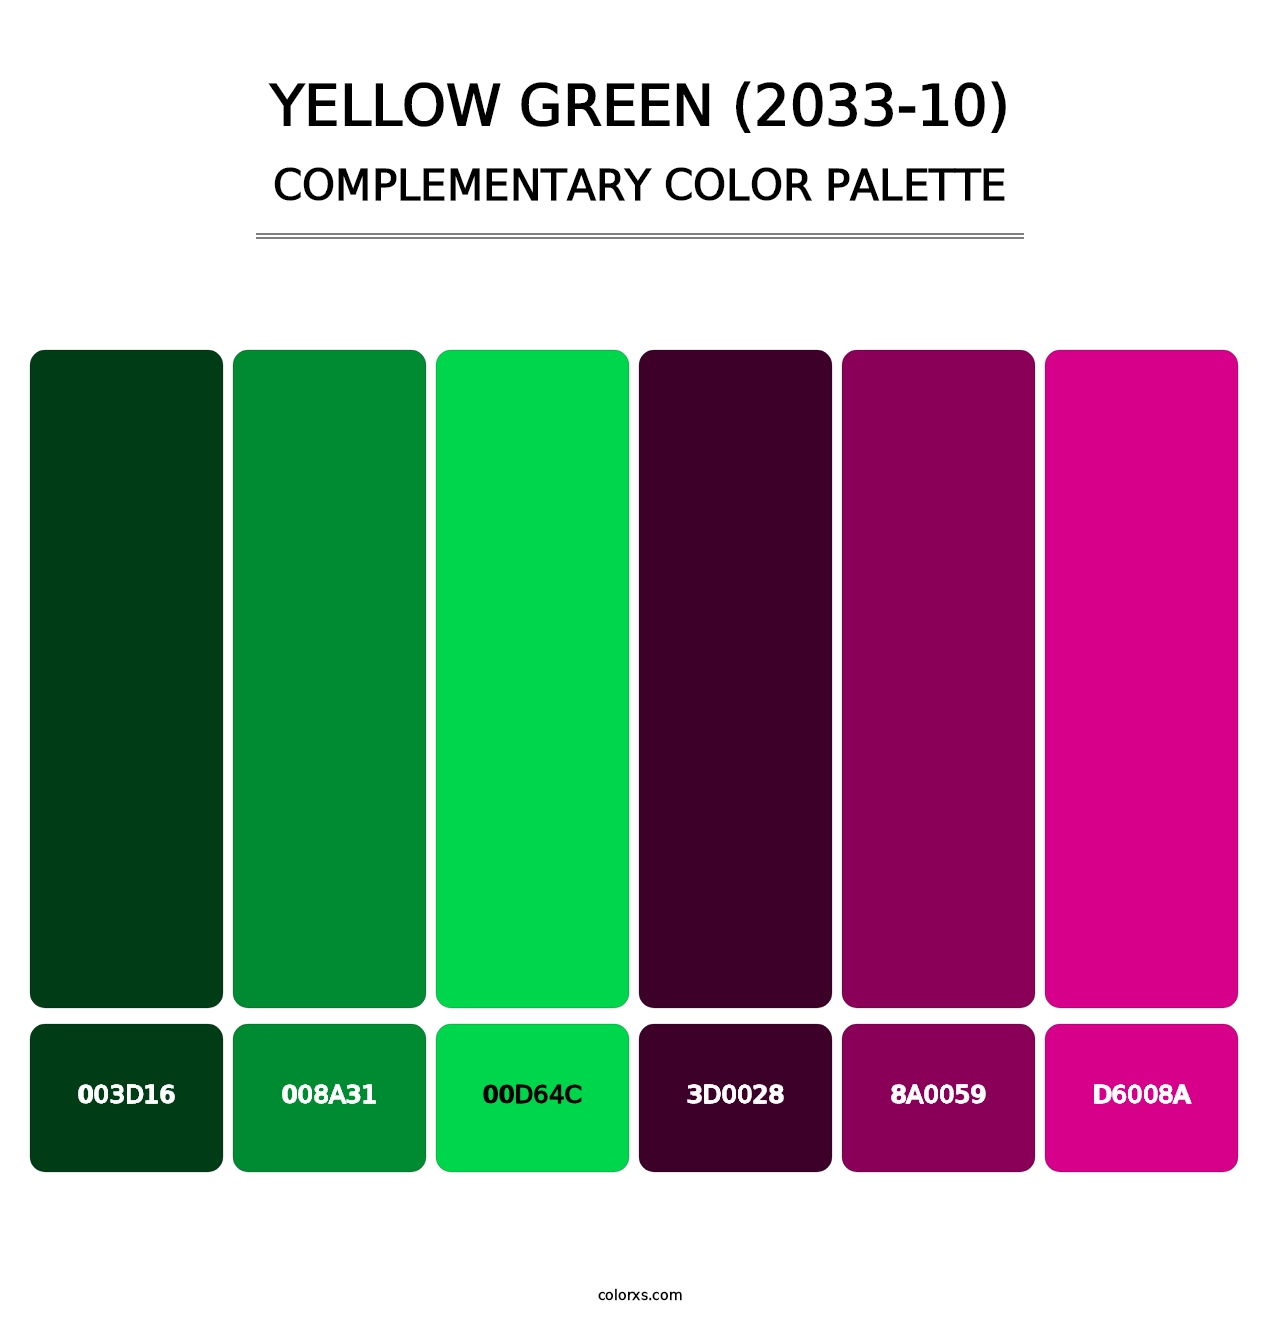 Yellow Green (2033-10) - Complementary Color Palette